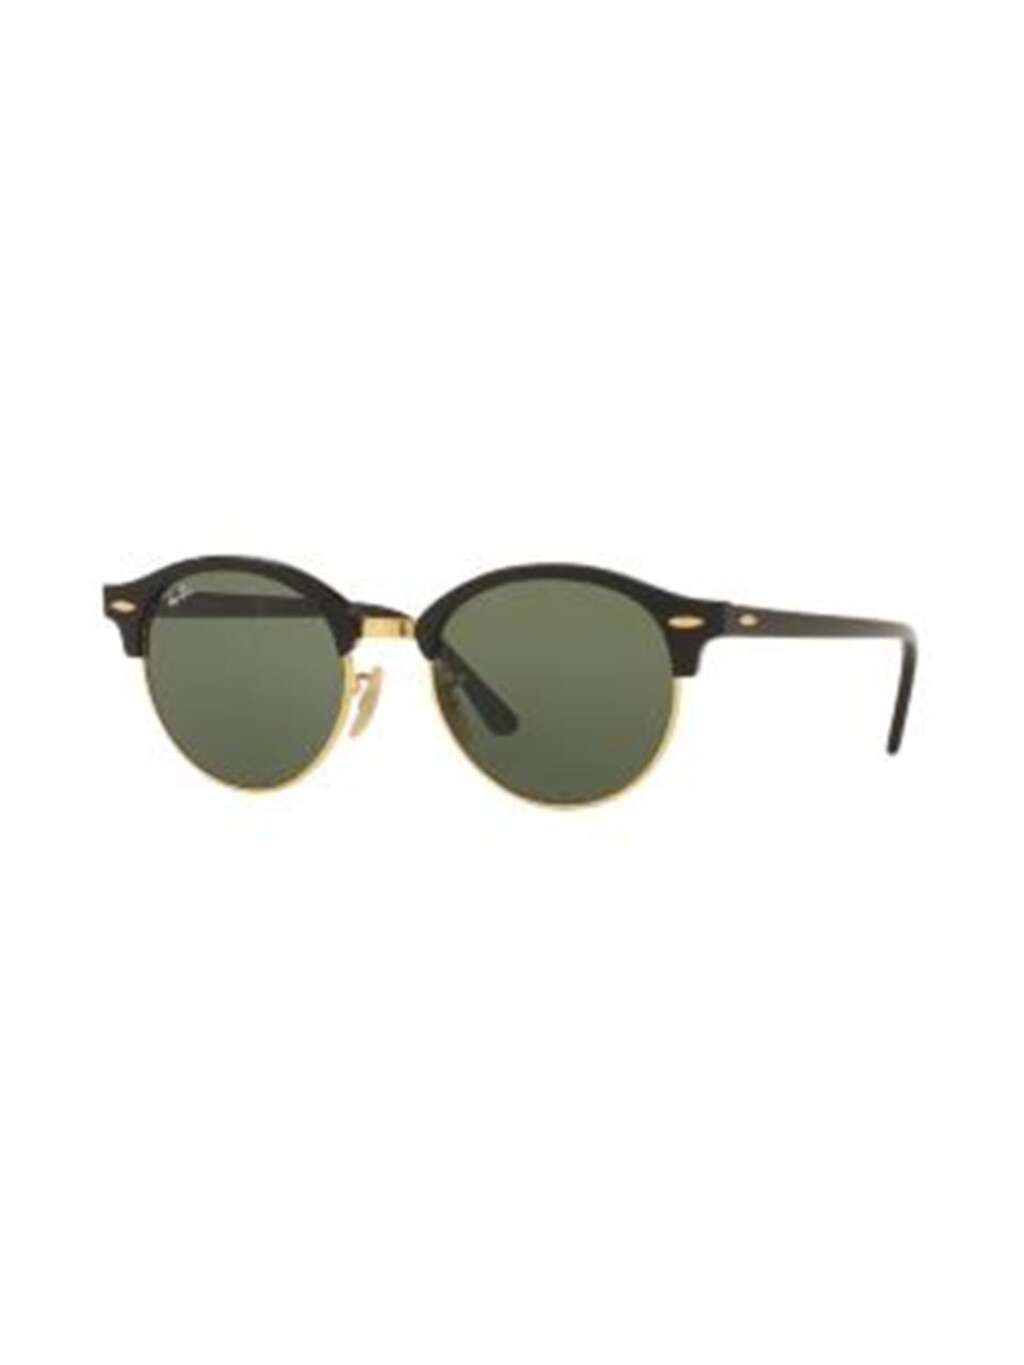 Ray-Ban Clubroand Sunglasses